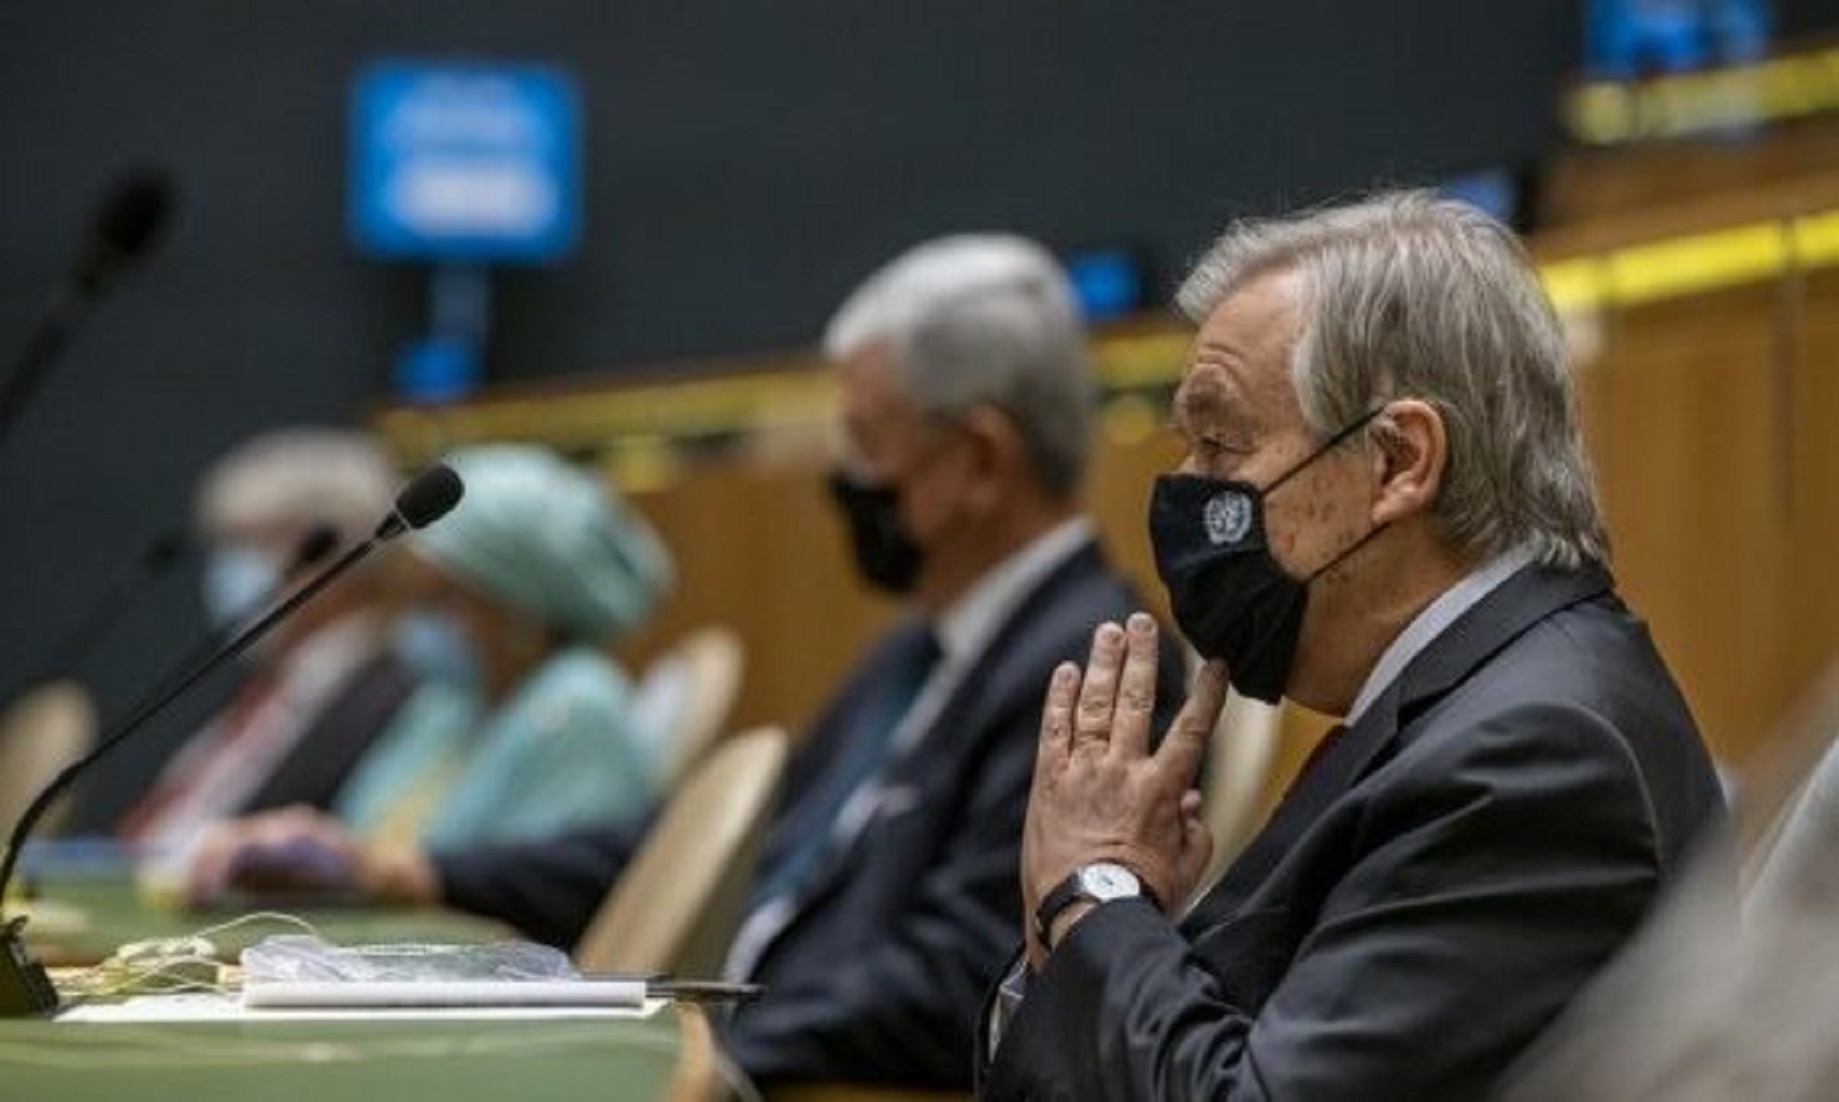 Prospects Of Two-State Solution To Israeli-Palestinian Conflict More “Distant”: UN Chief